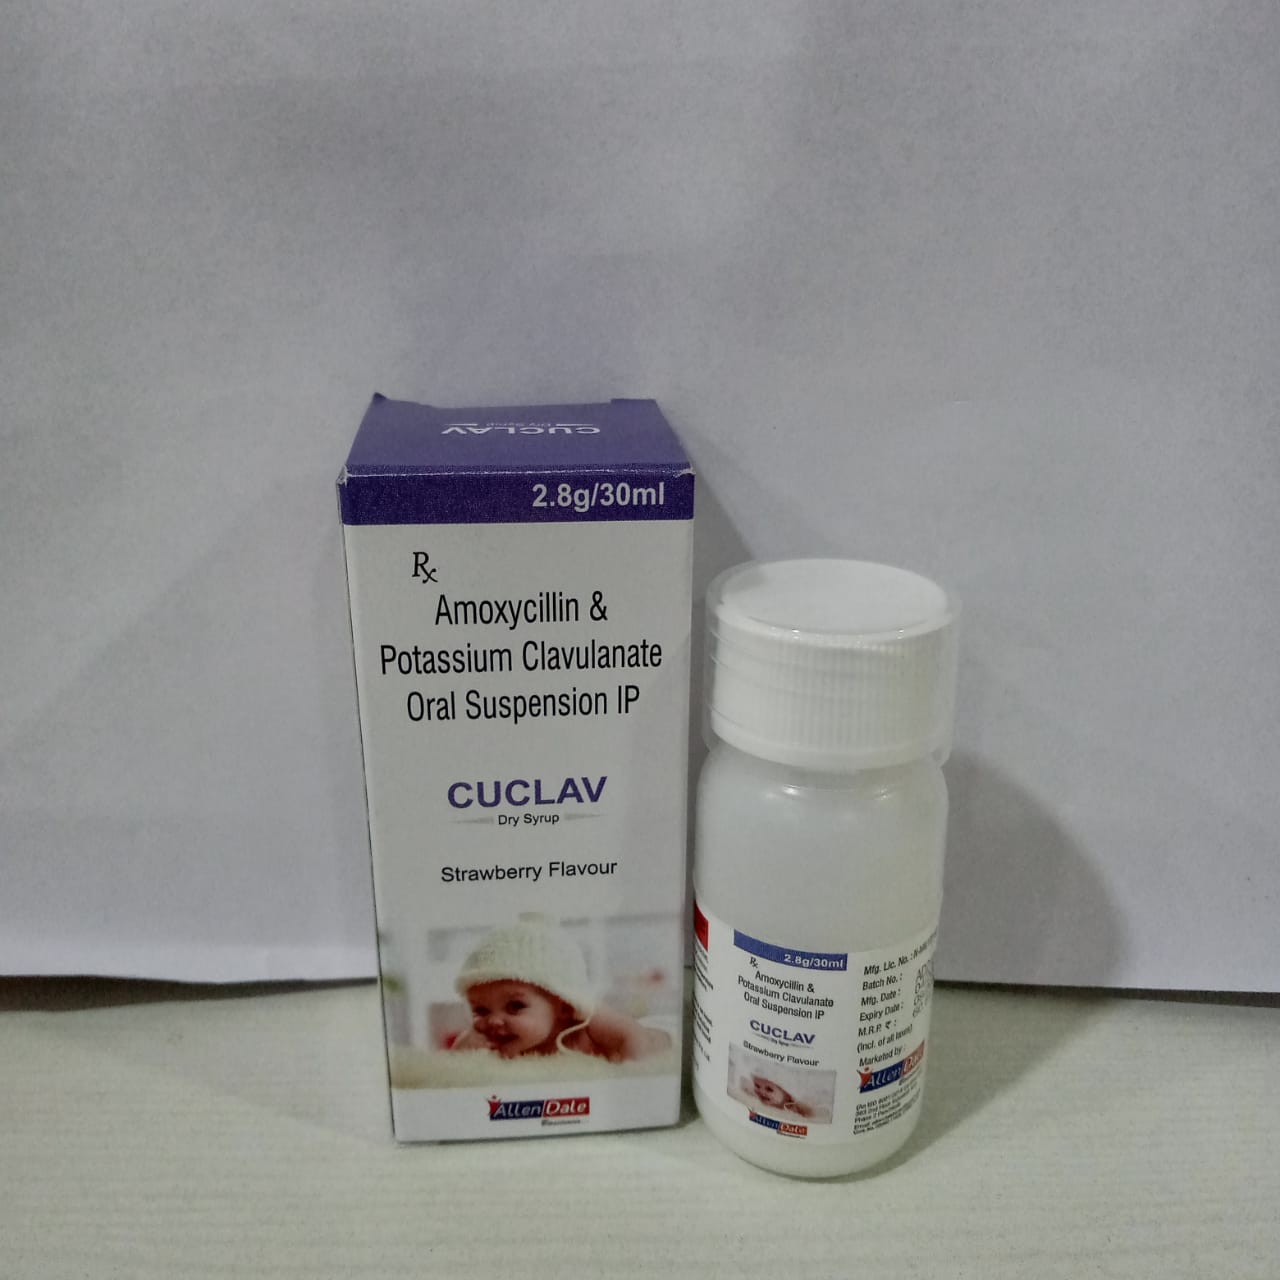 CUCLAV Dry Syrup